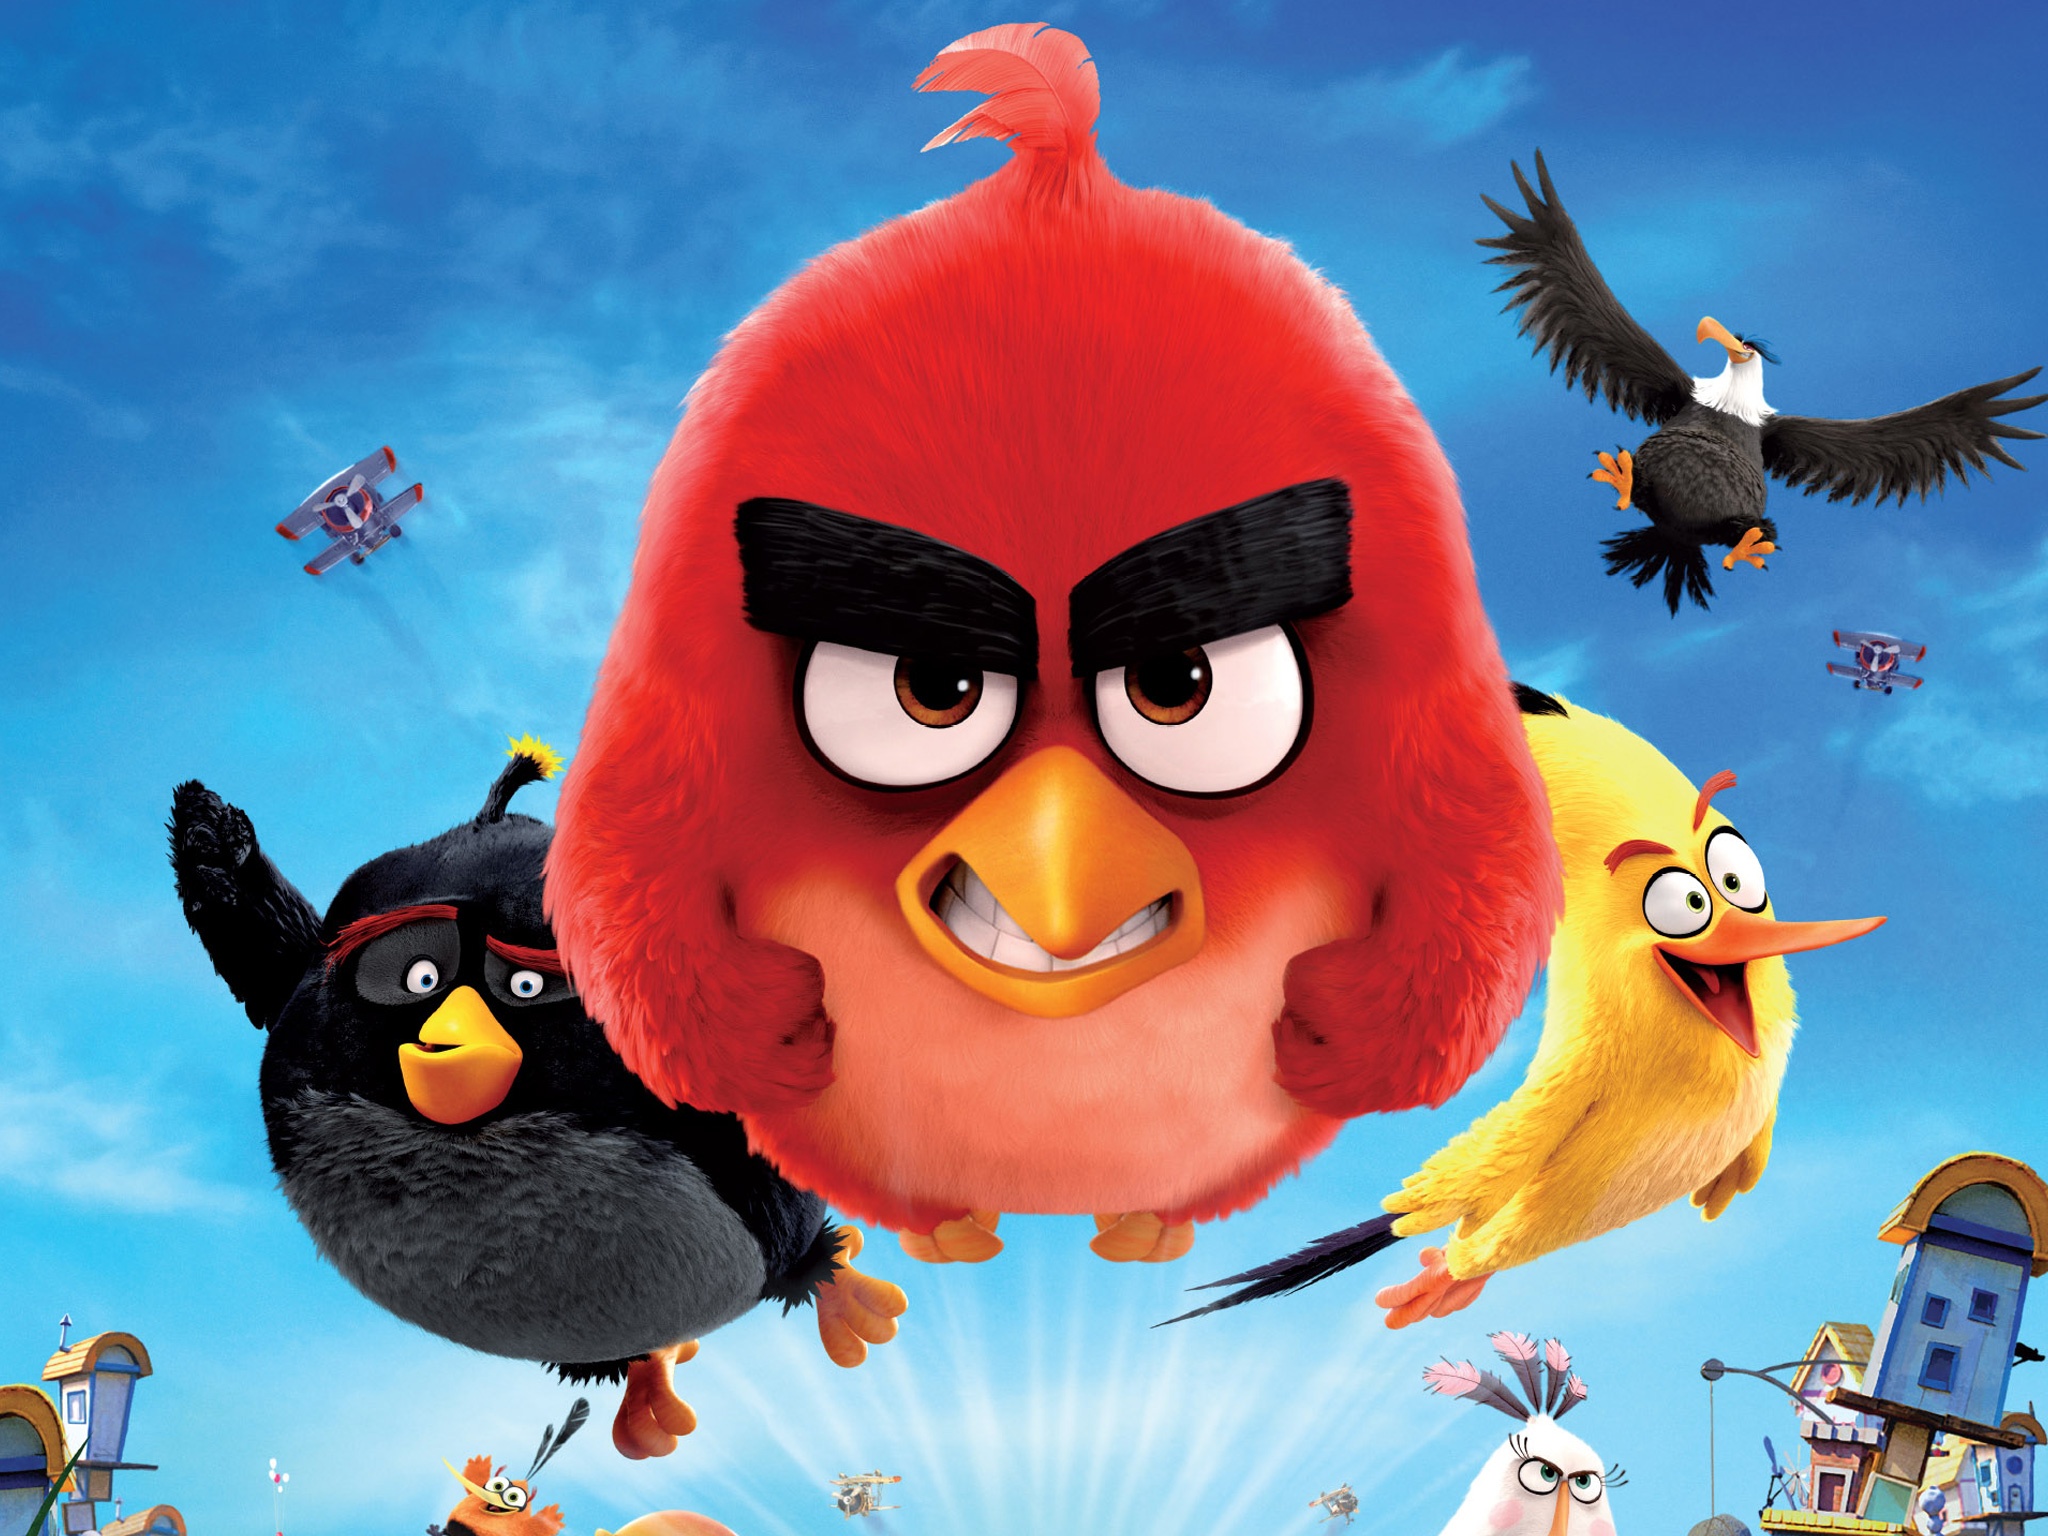 Free download 2016 Angry Birds Movie Wallpapers in jpg format for